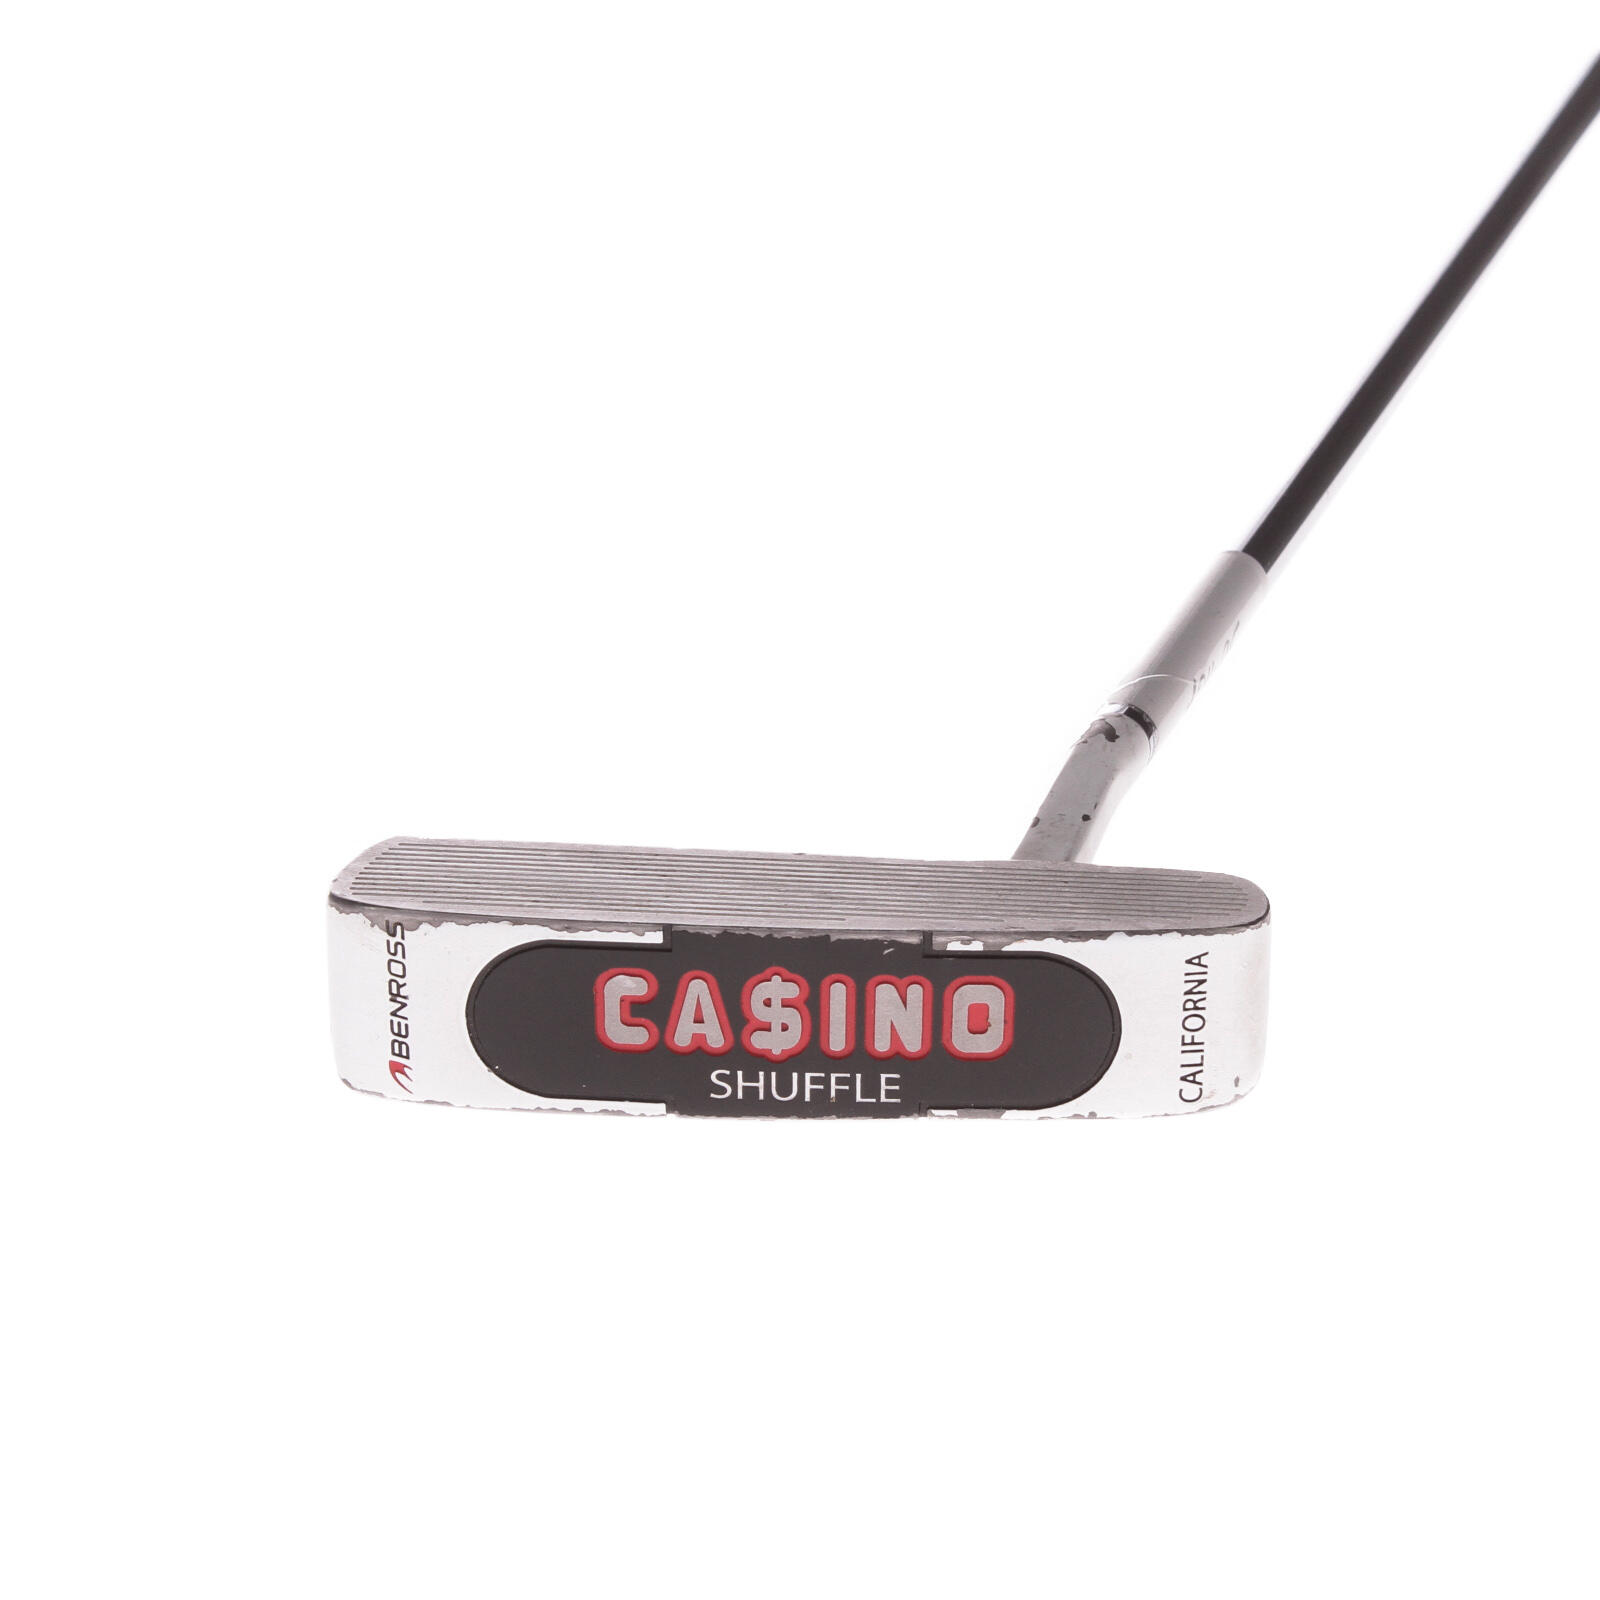 USED - Benross Casino Putter 33 Inches Length Steel Shaft Right Handed - GRADE B 1/6